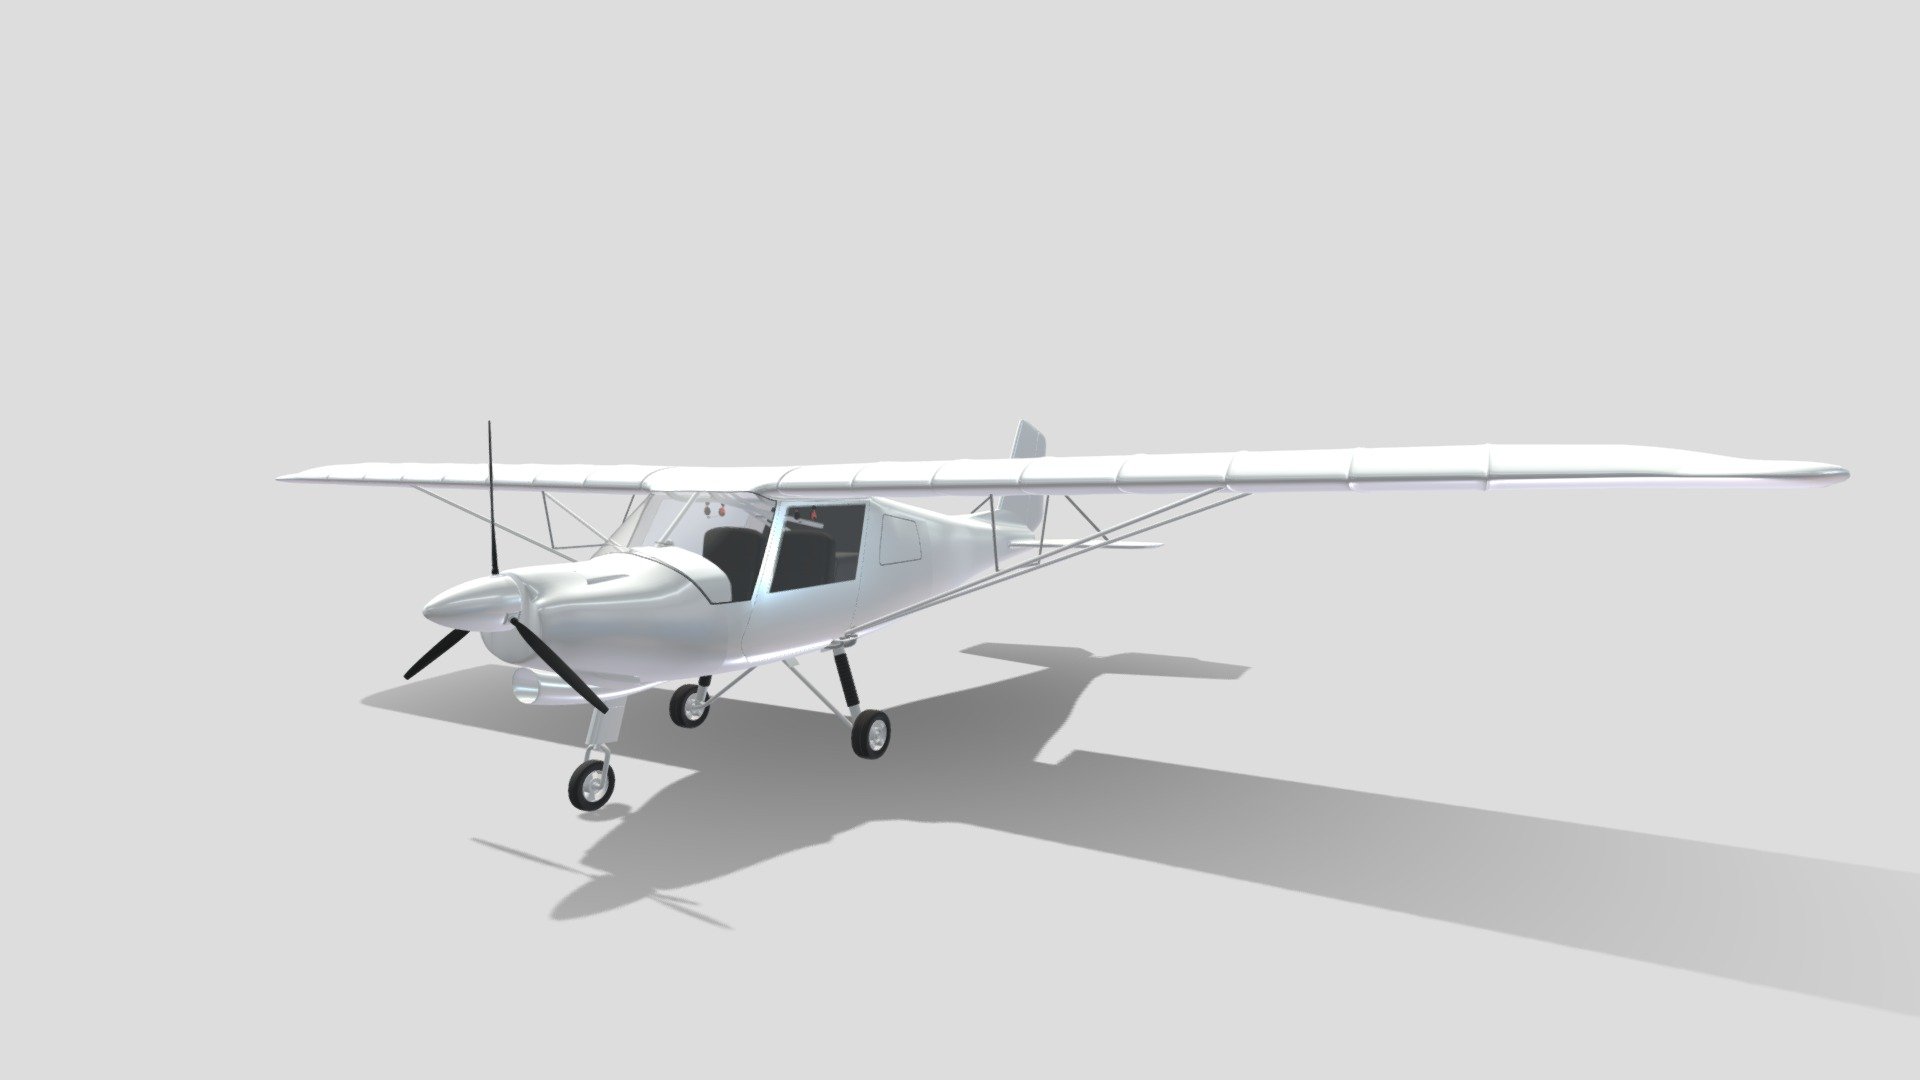 3D model of the Ikarus c42 made in Blender.

The Ikarus C42 is a two-seat, fixed tricycle gear, general aviation microlight aircraft, manufactured in Germany by Comco Ikarus. It is used primarily for flight training, touring and personal flying. (Wikipedia) - Ikarus c42 - 3D model by Hashbrown5 3d model